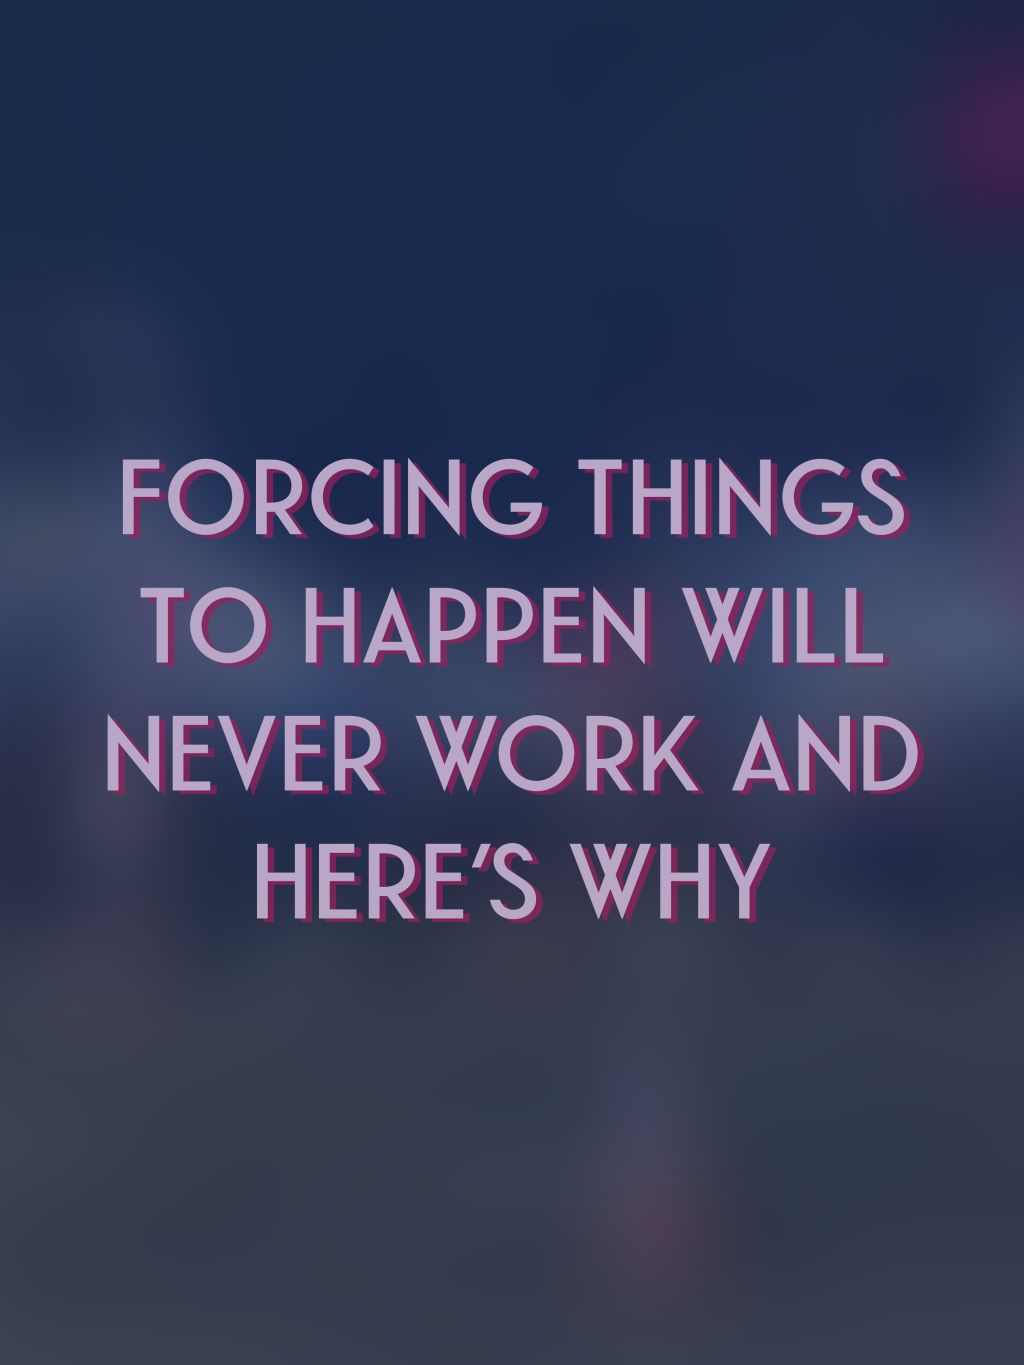 Forcing Things to Happen With Someone Will Never Work And Here’s Why